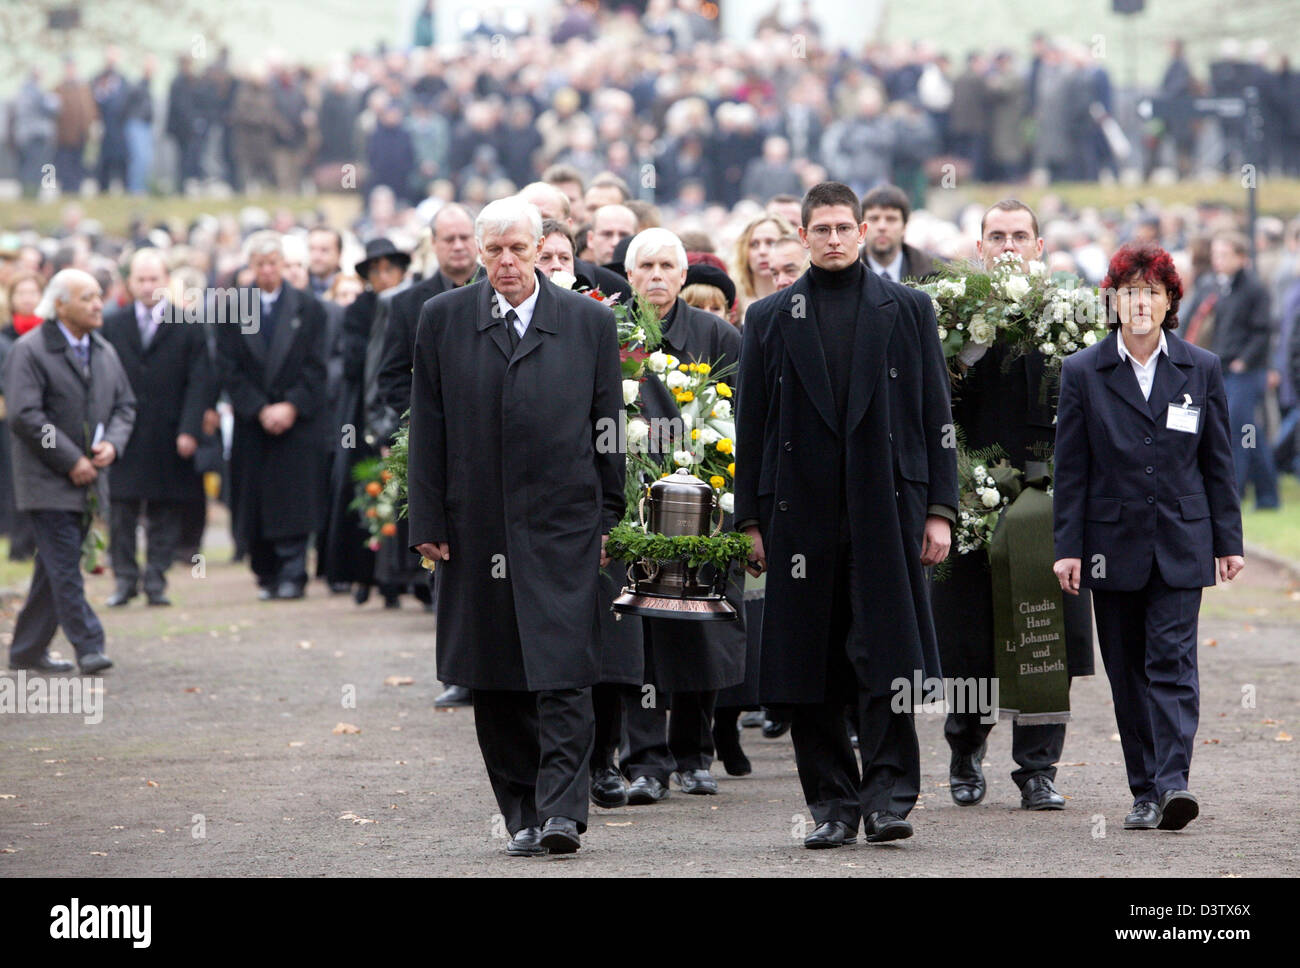 The urn of former GDR espionage governor Markus Wolf is carried to its grave in Berlin, Germany, Saturday, 25 November 2006. Wolf died on 9 November 2006, a special date in Germany, aged 83. Hundreds of people followed the funeral procession of Wolf, who was over 30 years responsible for 4,000 GDR exterior agents in the Cold War. Photo: Gero Breloer Stock Photo